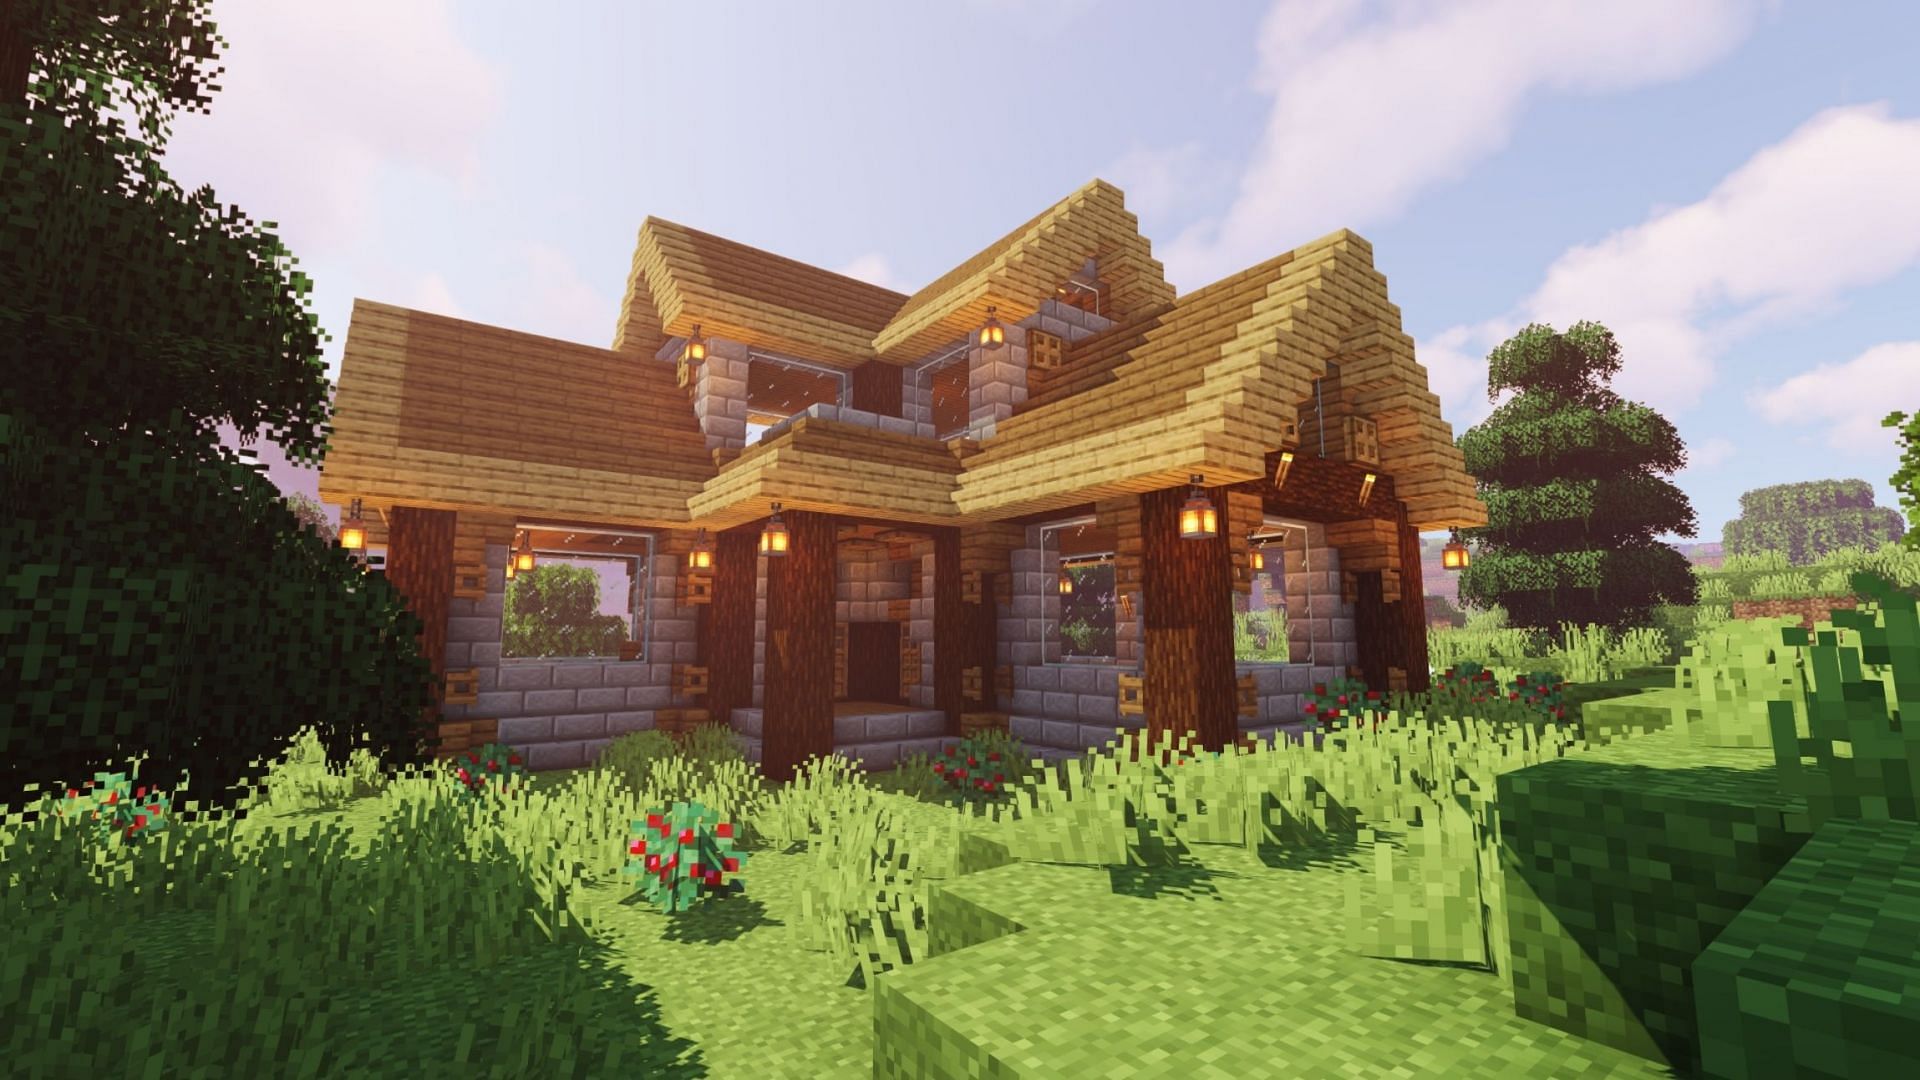 No matter how simple, Minecraft houses can still be made beautiful (Image via Reddit)